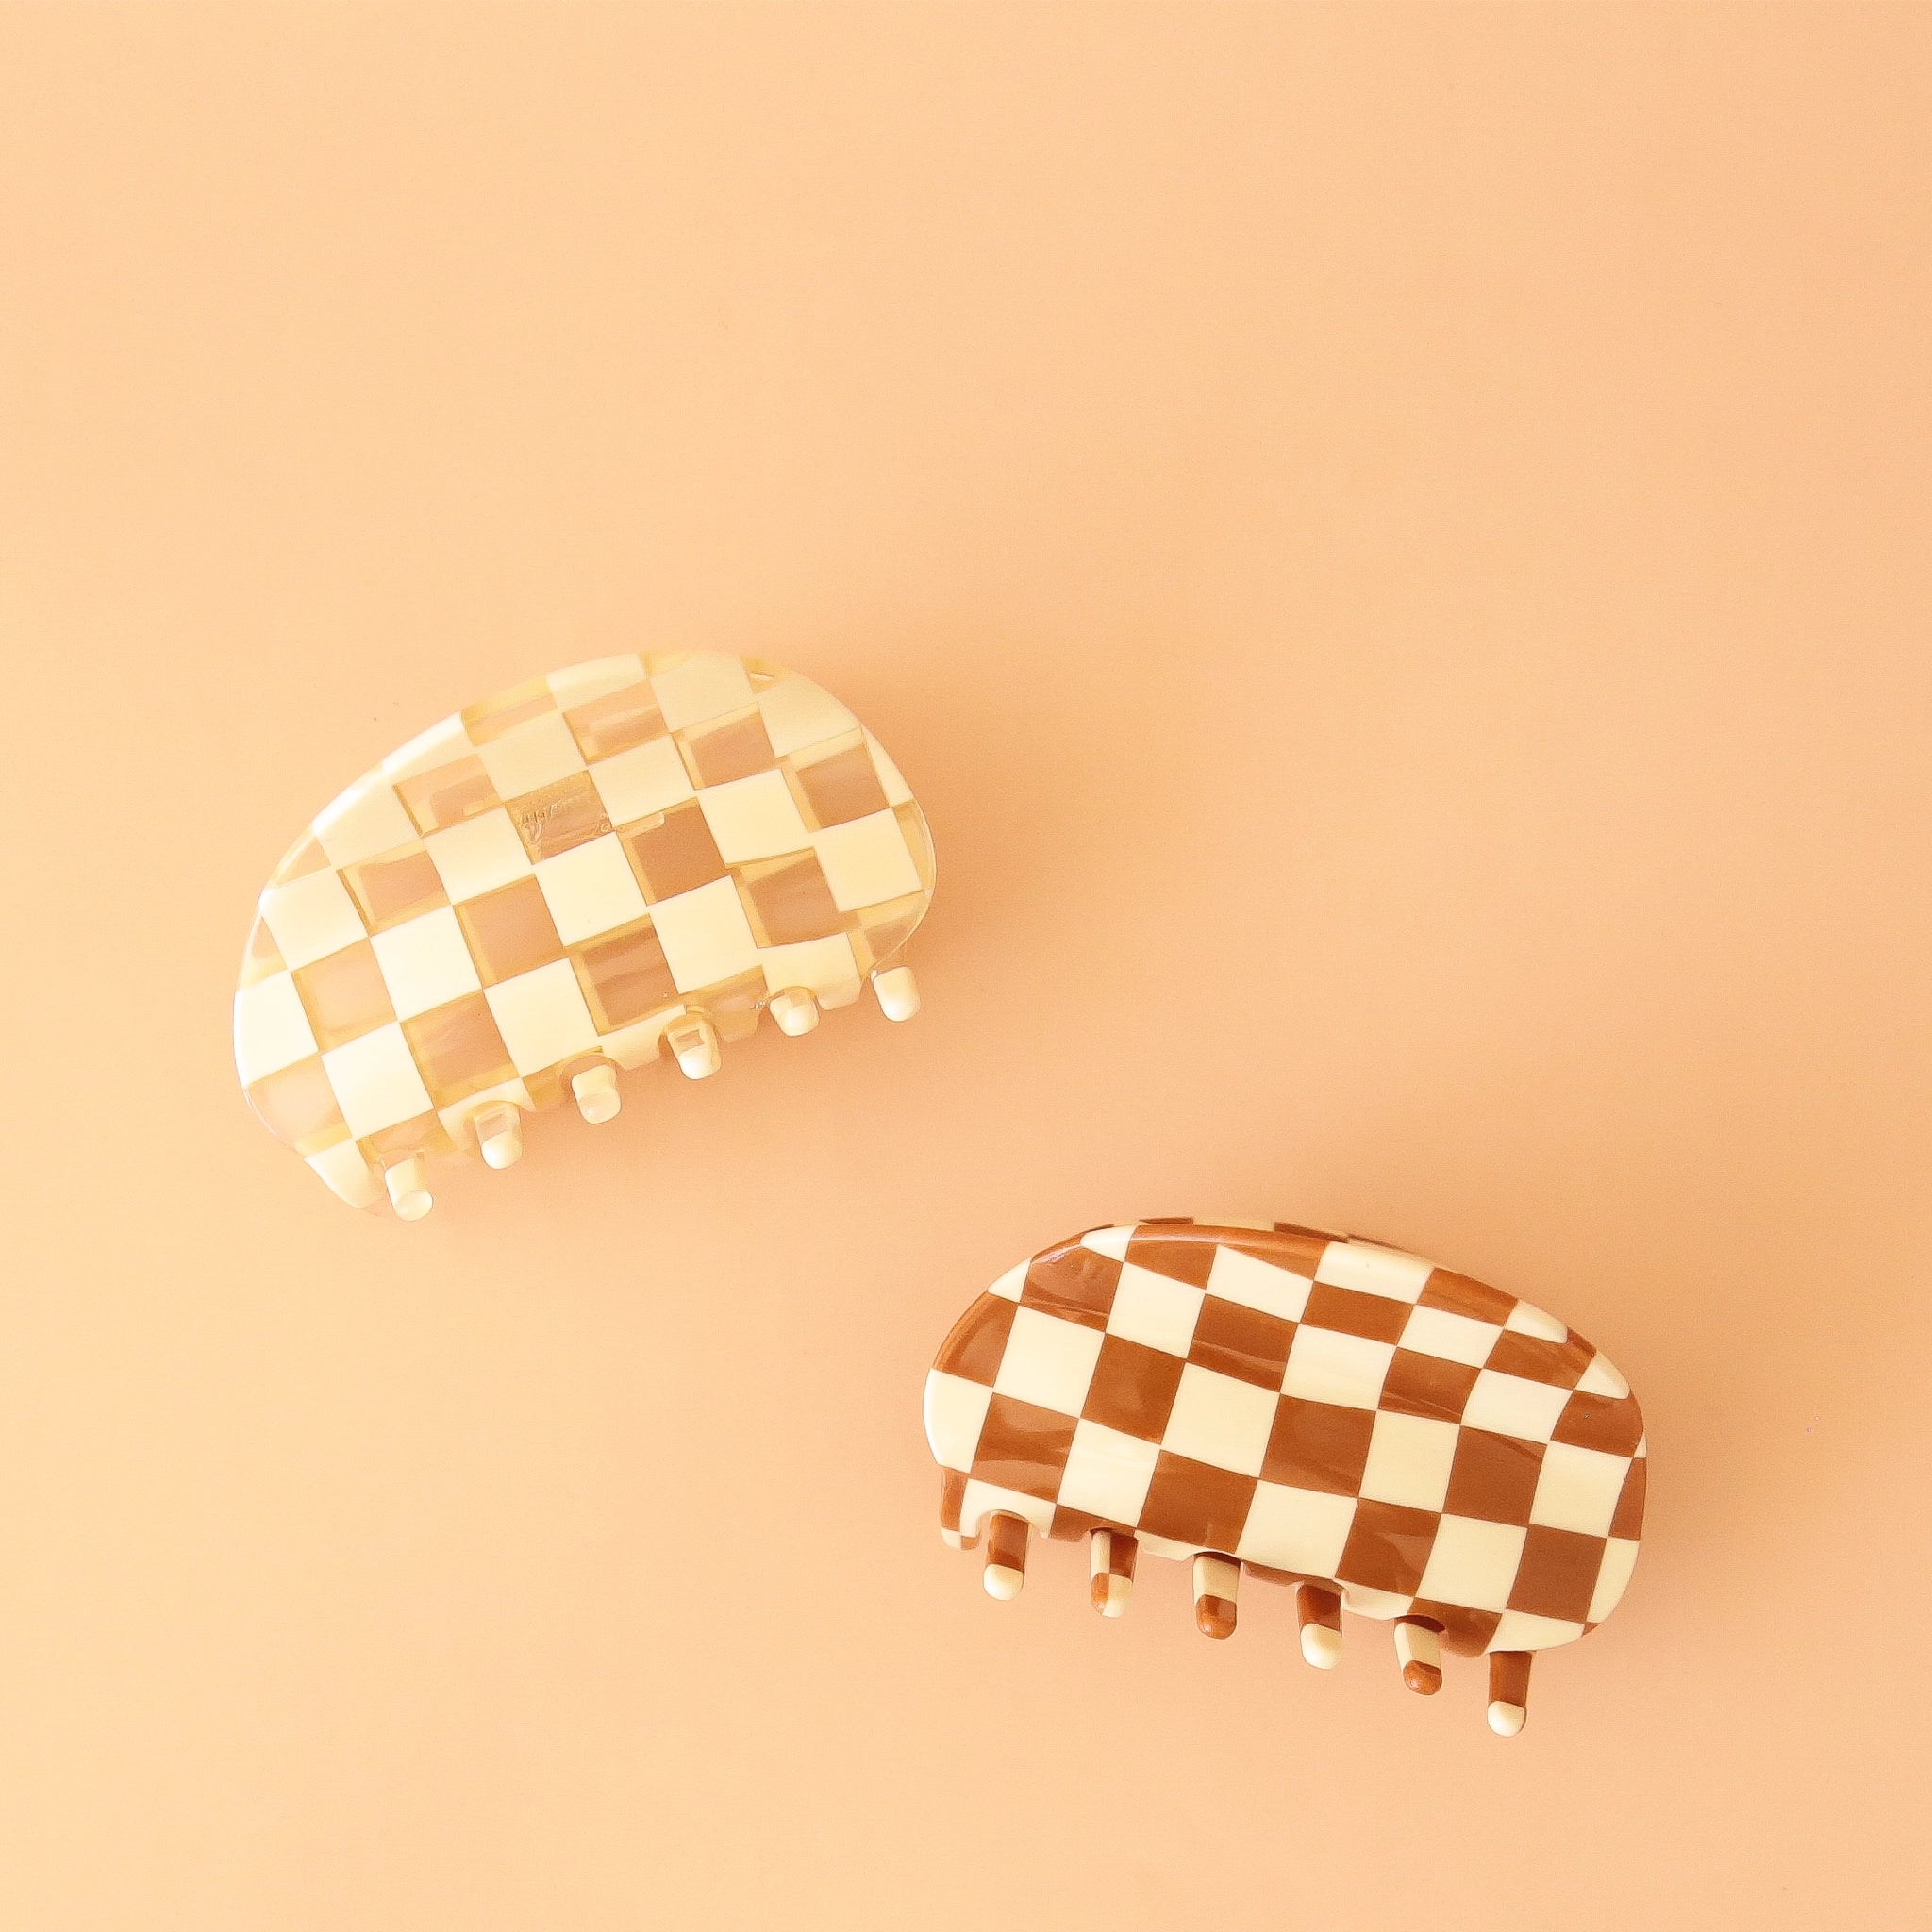 The rounded white and clear checker claw clip photographed with a brown and cream checkered claw clip with the same shape. 